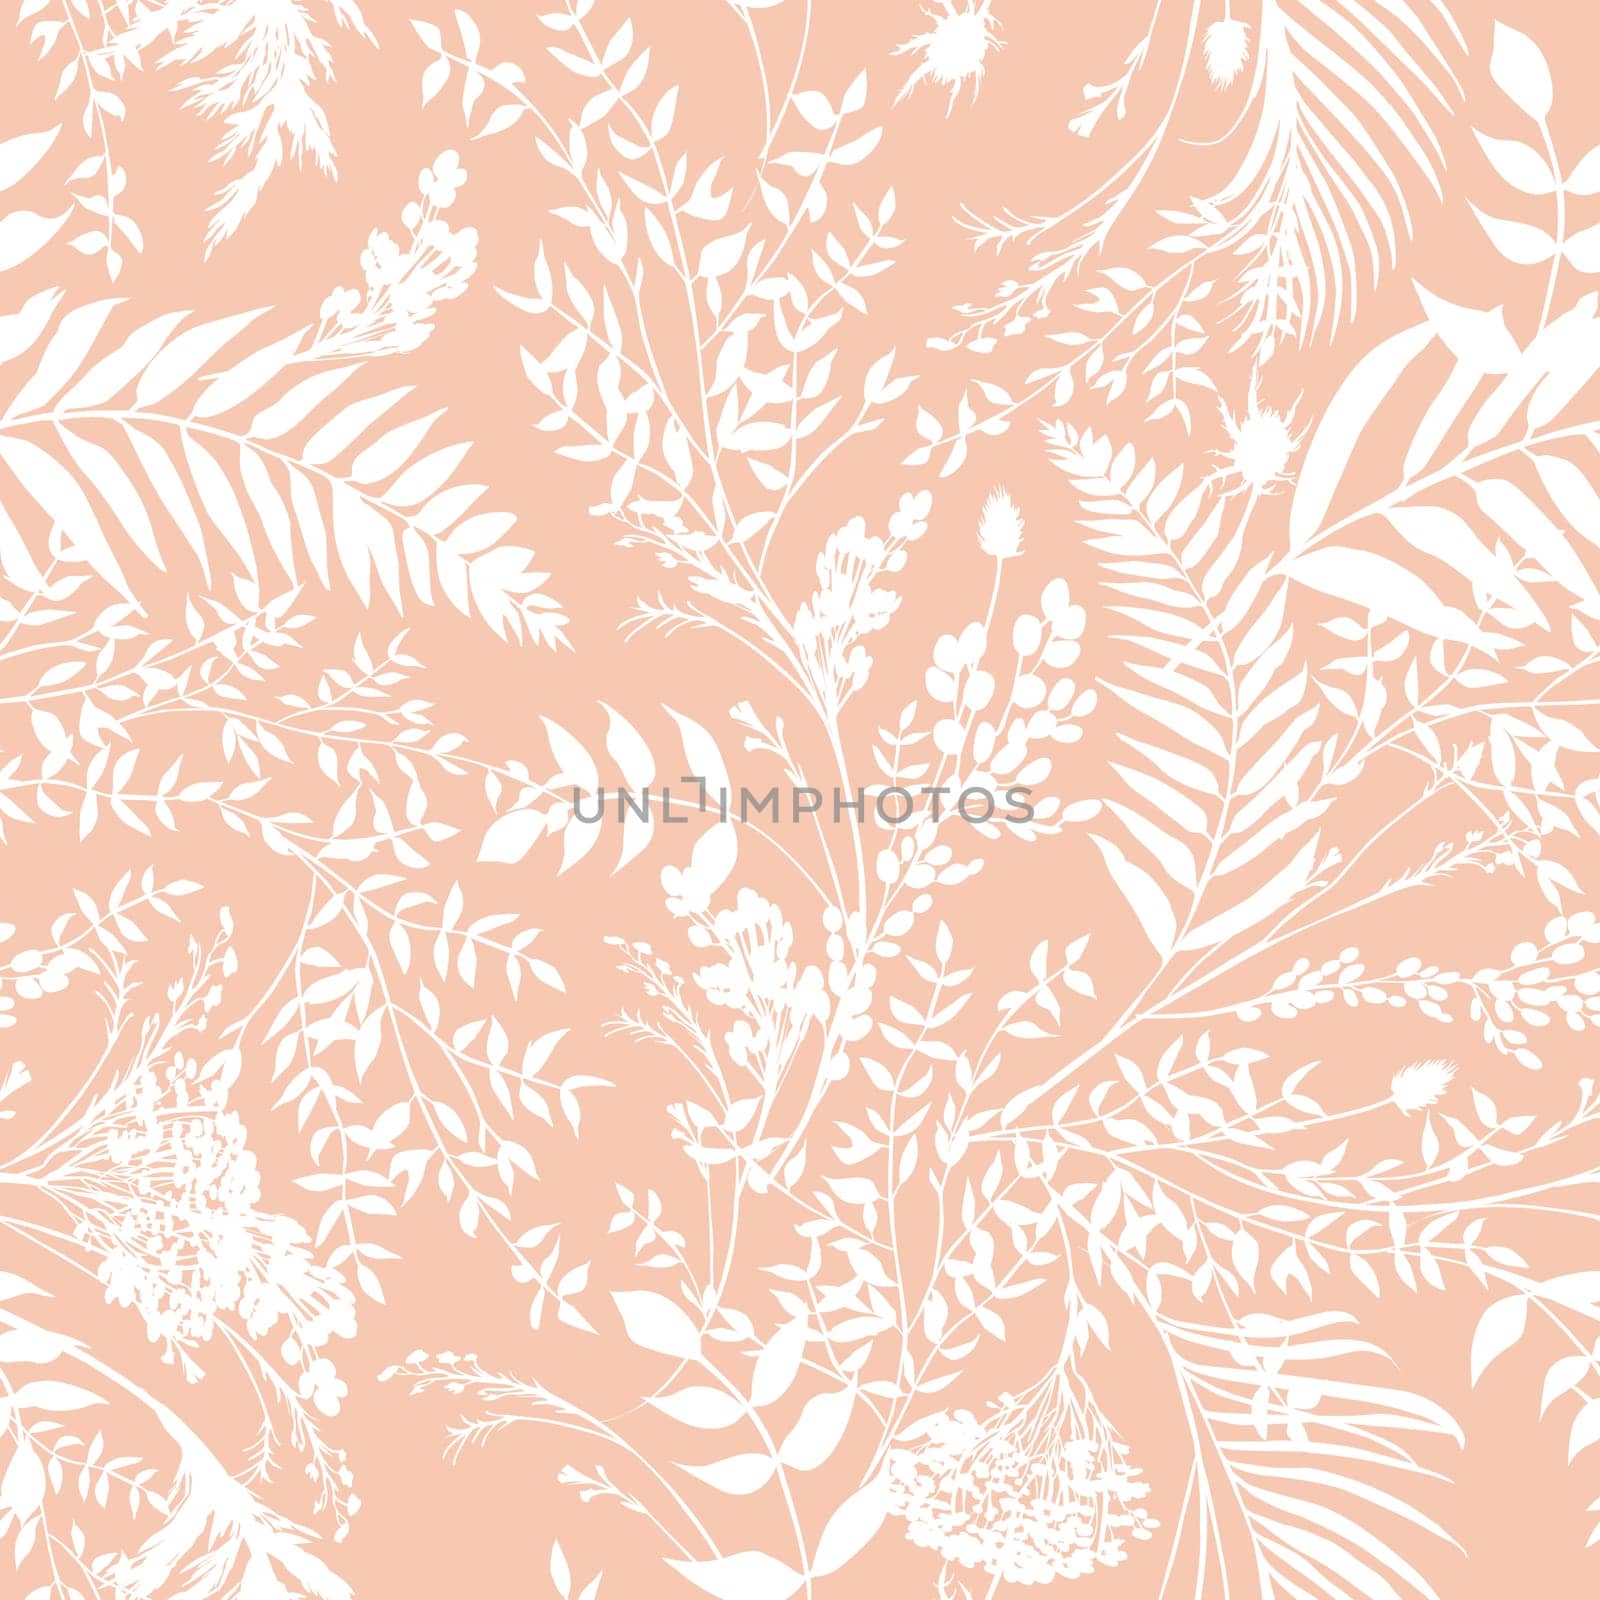 Seamless watercolor pattern with boho style fern branches and leaves drawn by MarinaVoyush